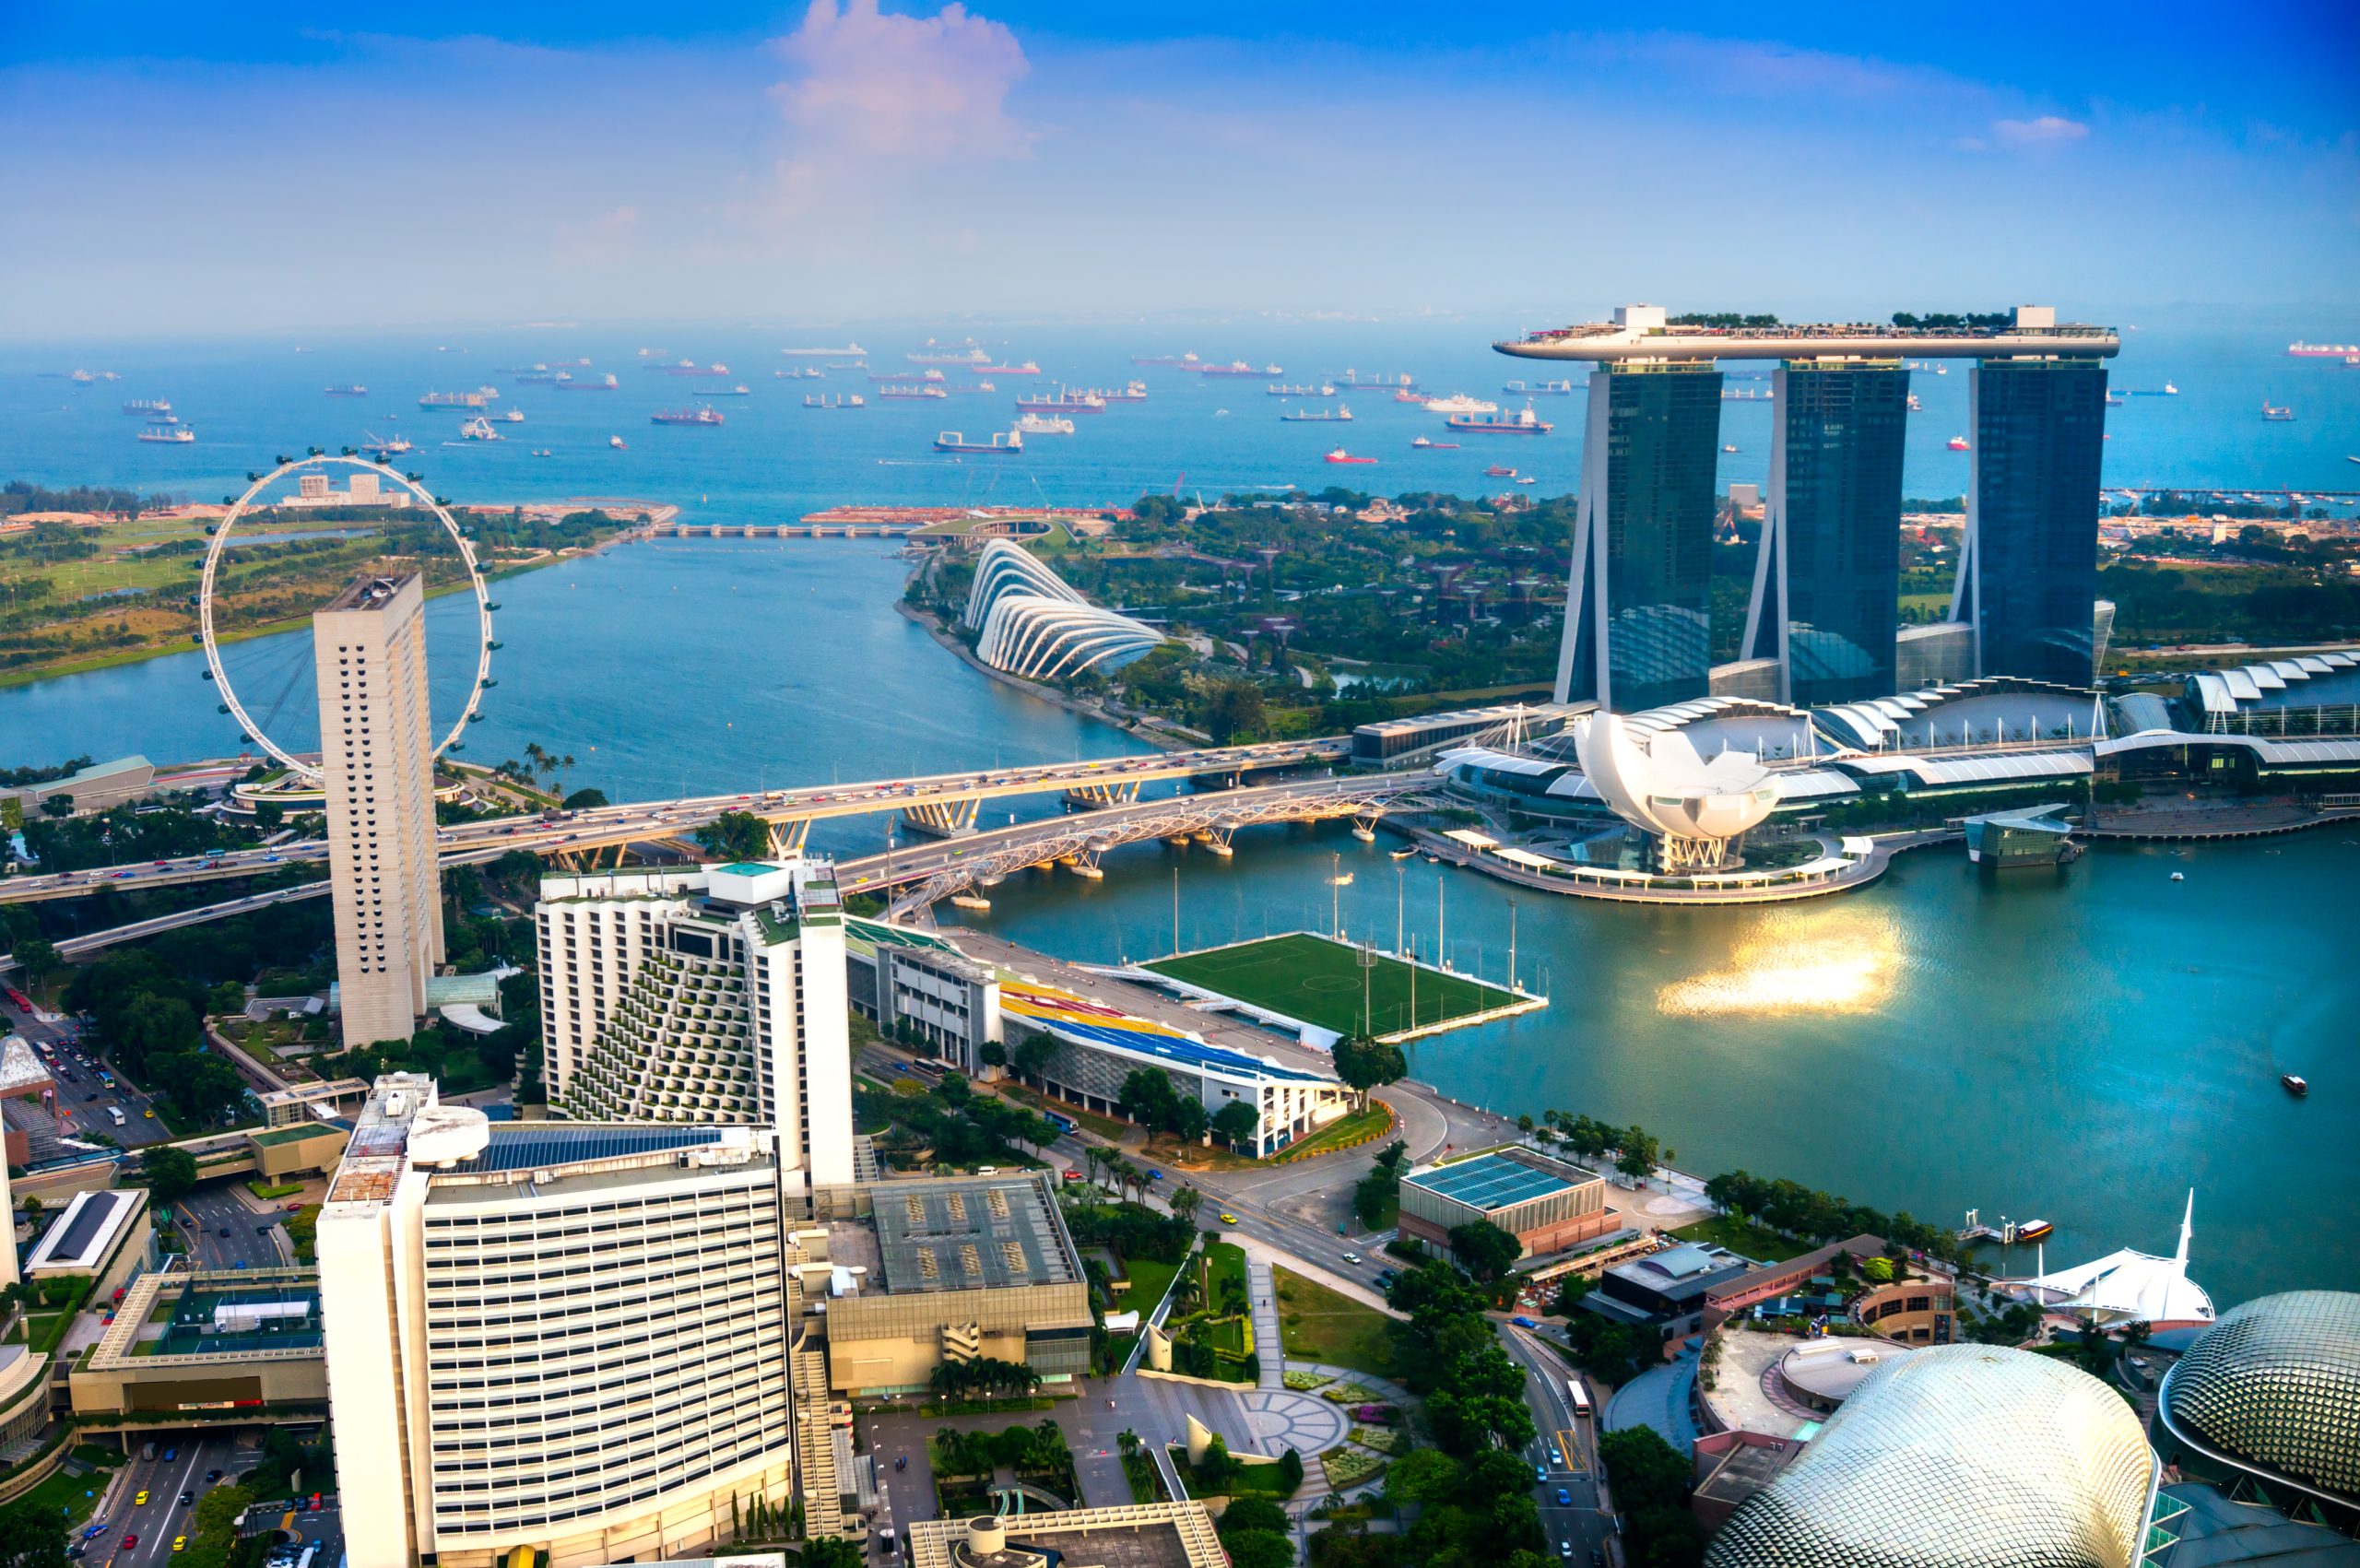 Which country does Singapore belong to?